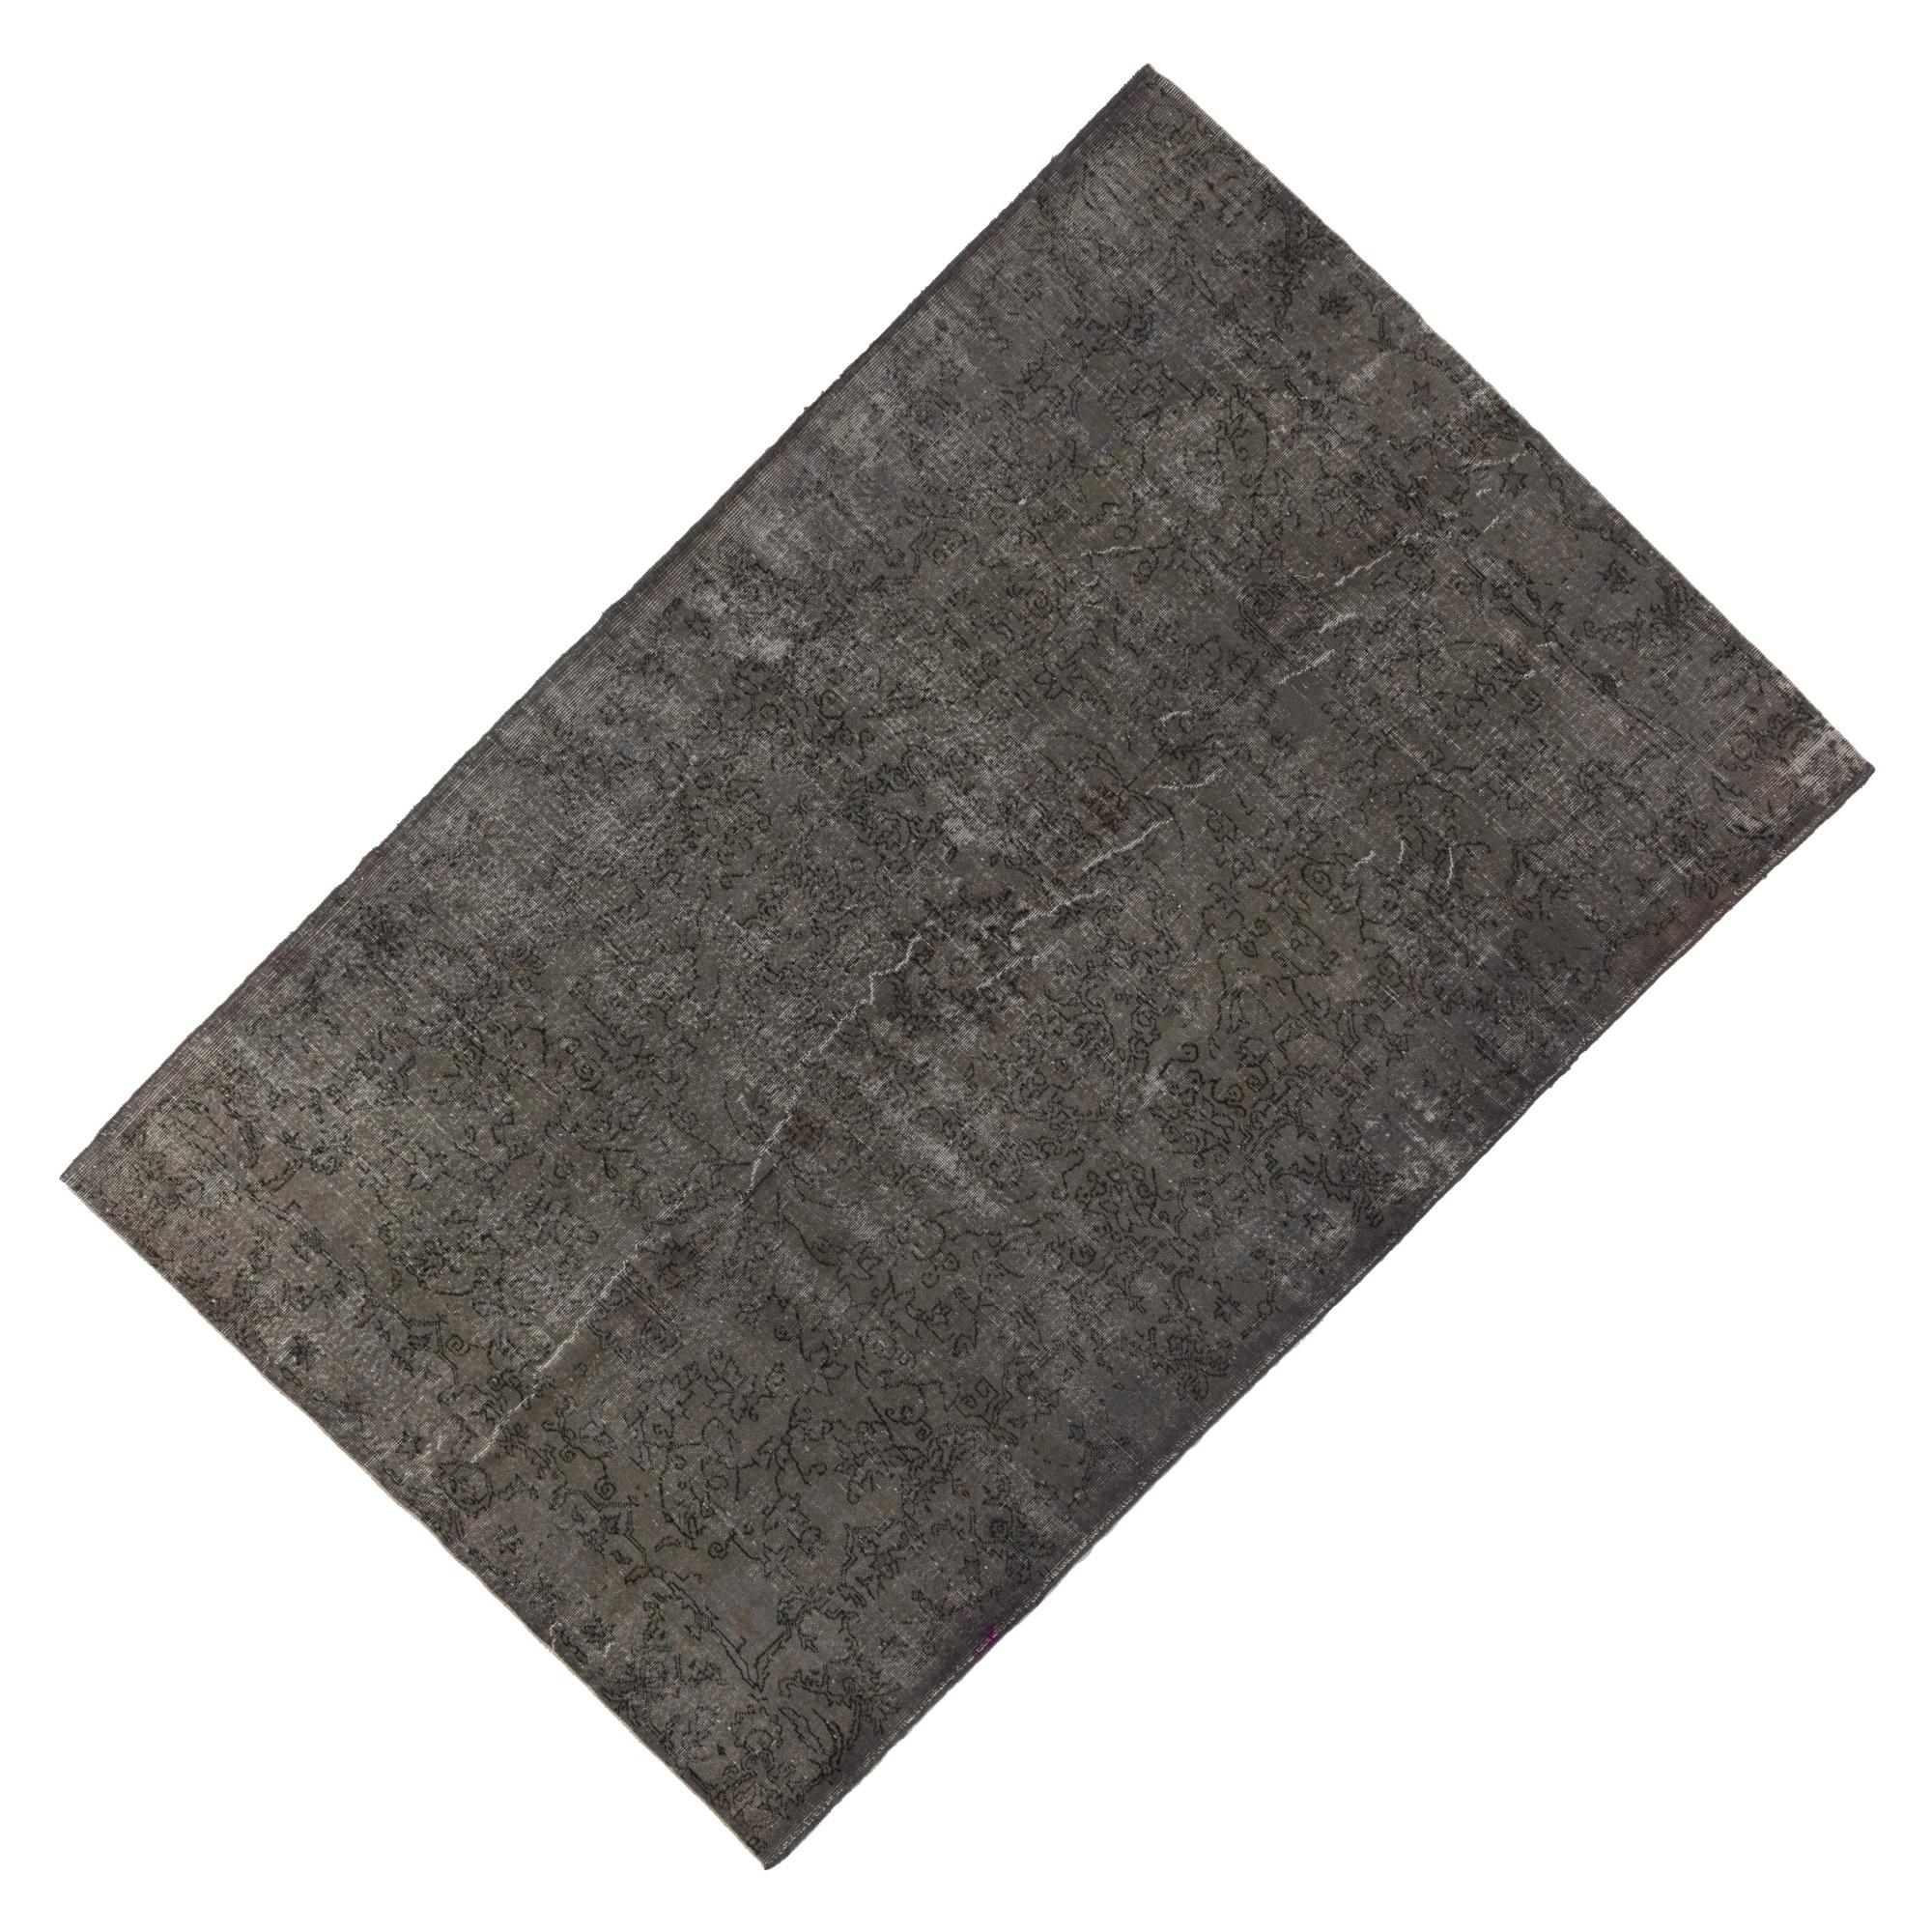 Wool 6.5x10 Ft Vintage Rug in Gray, Hand-Made Carpet for Modern Home and Office Decor For Sale